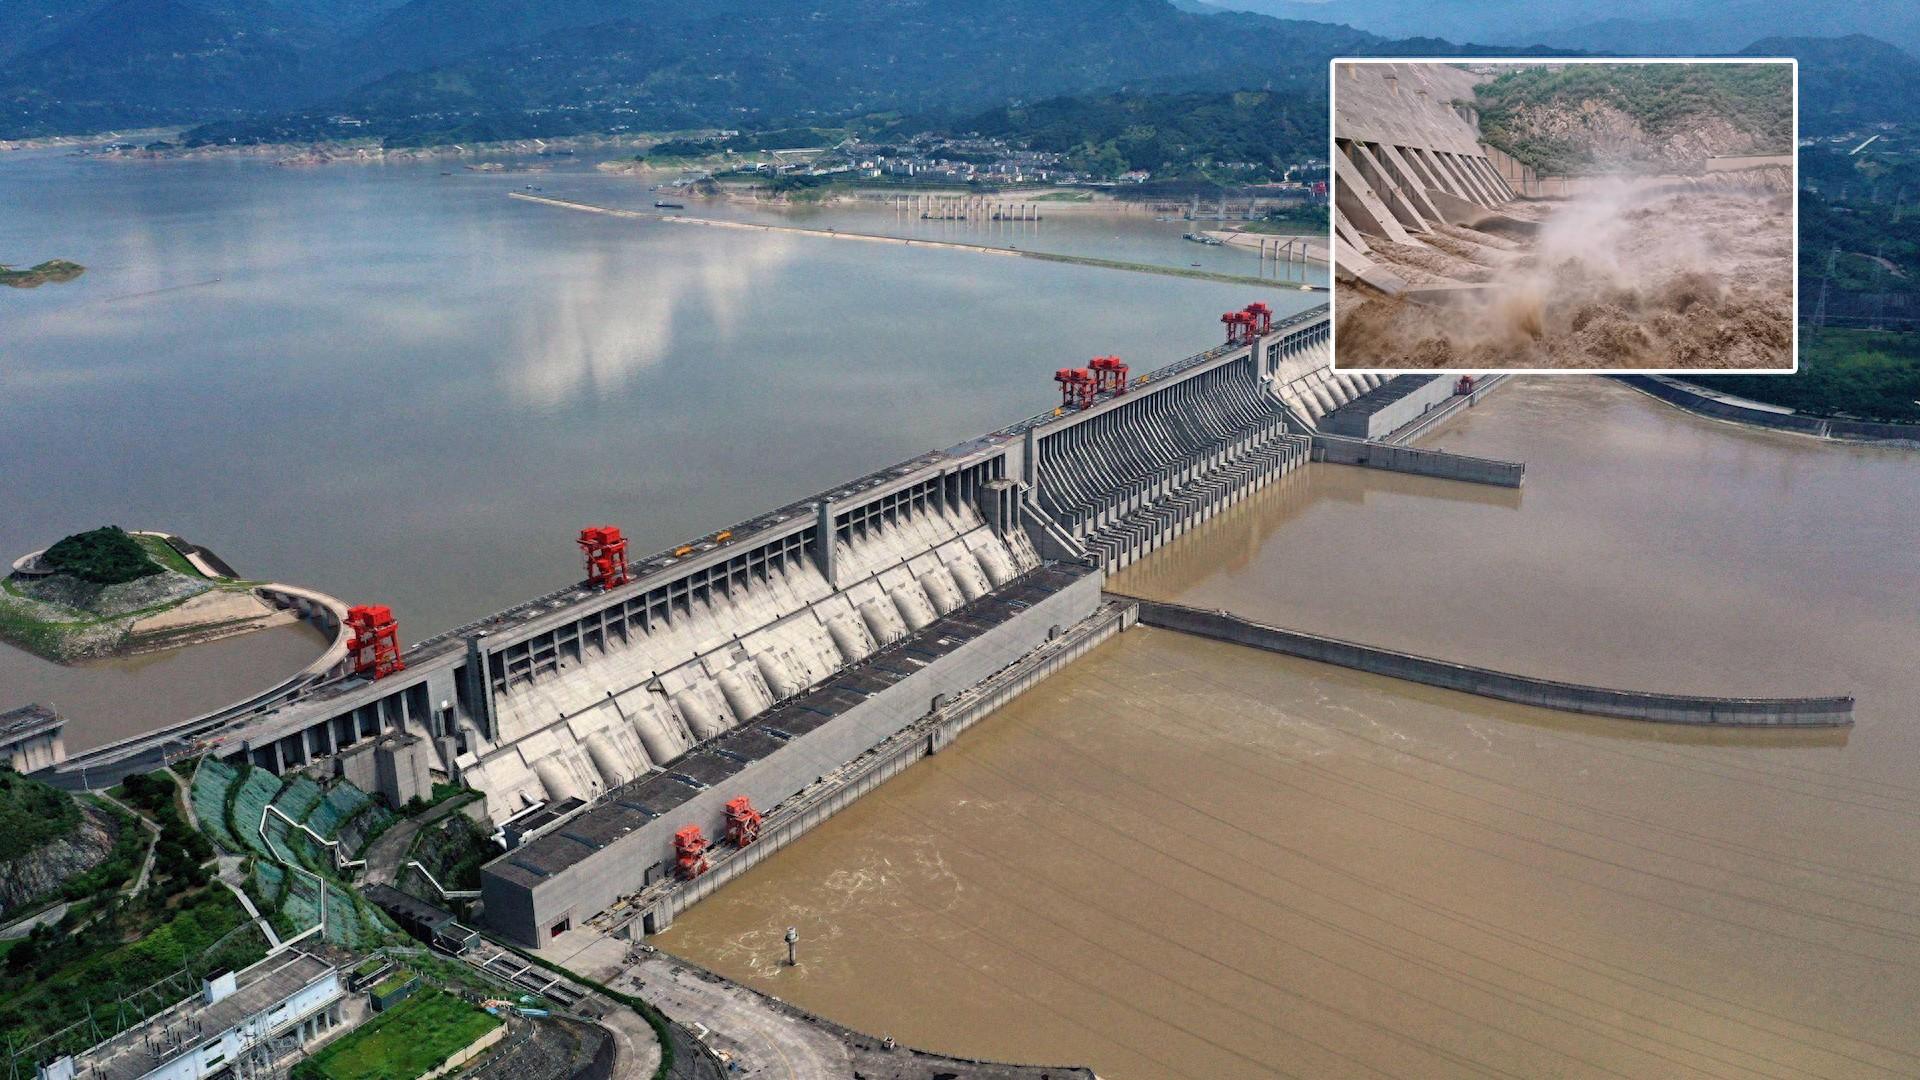 After 17 years of construction, the Three Gorges Dam has accumulated 1.8 billion tons of sediment. What will be the ultimate consequences?